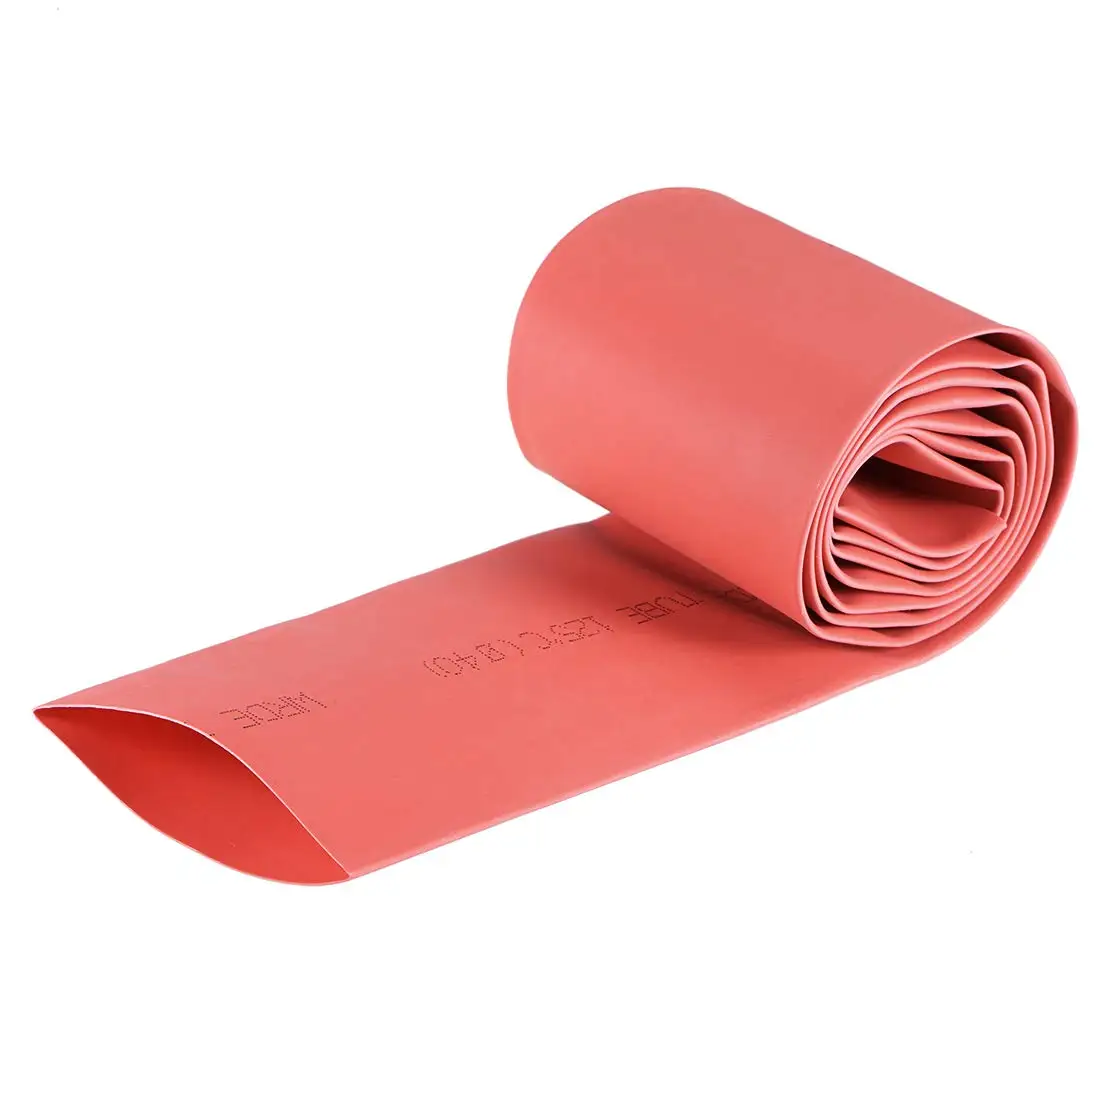 

Keszoox Heat Shrink Tubing, 40mm Dia 66mm Flat Width 2:1 Ratio Shrinkable Tube Cable Sleeve 1m - Red